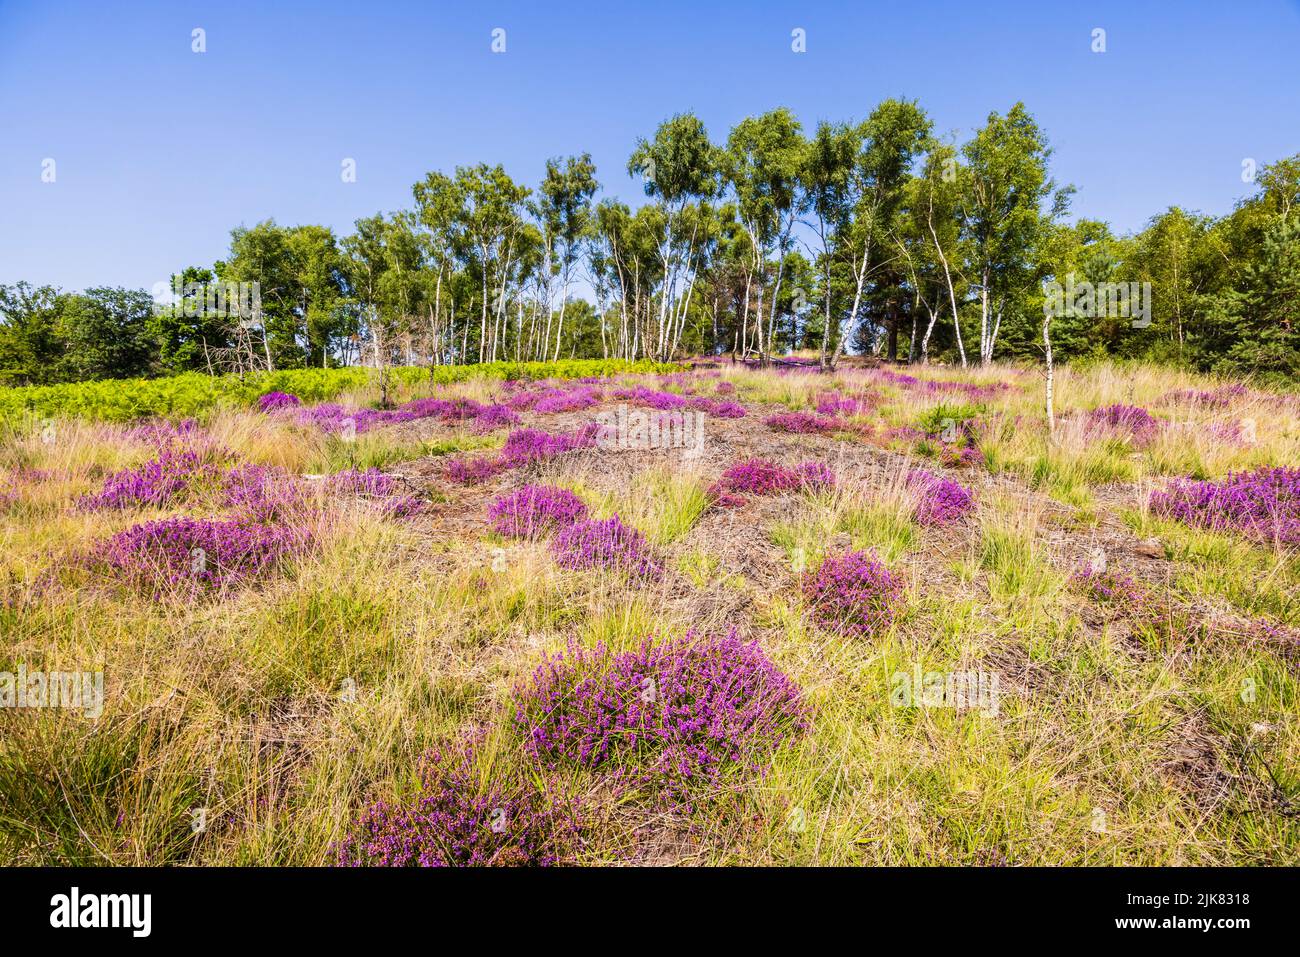 Heathland on Chobham Common, Surrey, south-east England with purple heather and a row of silver birch (Betula pendula) trees, blue sky on a sunny day Stock Photo